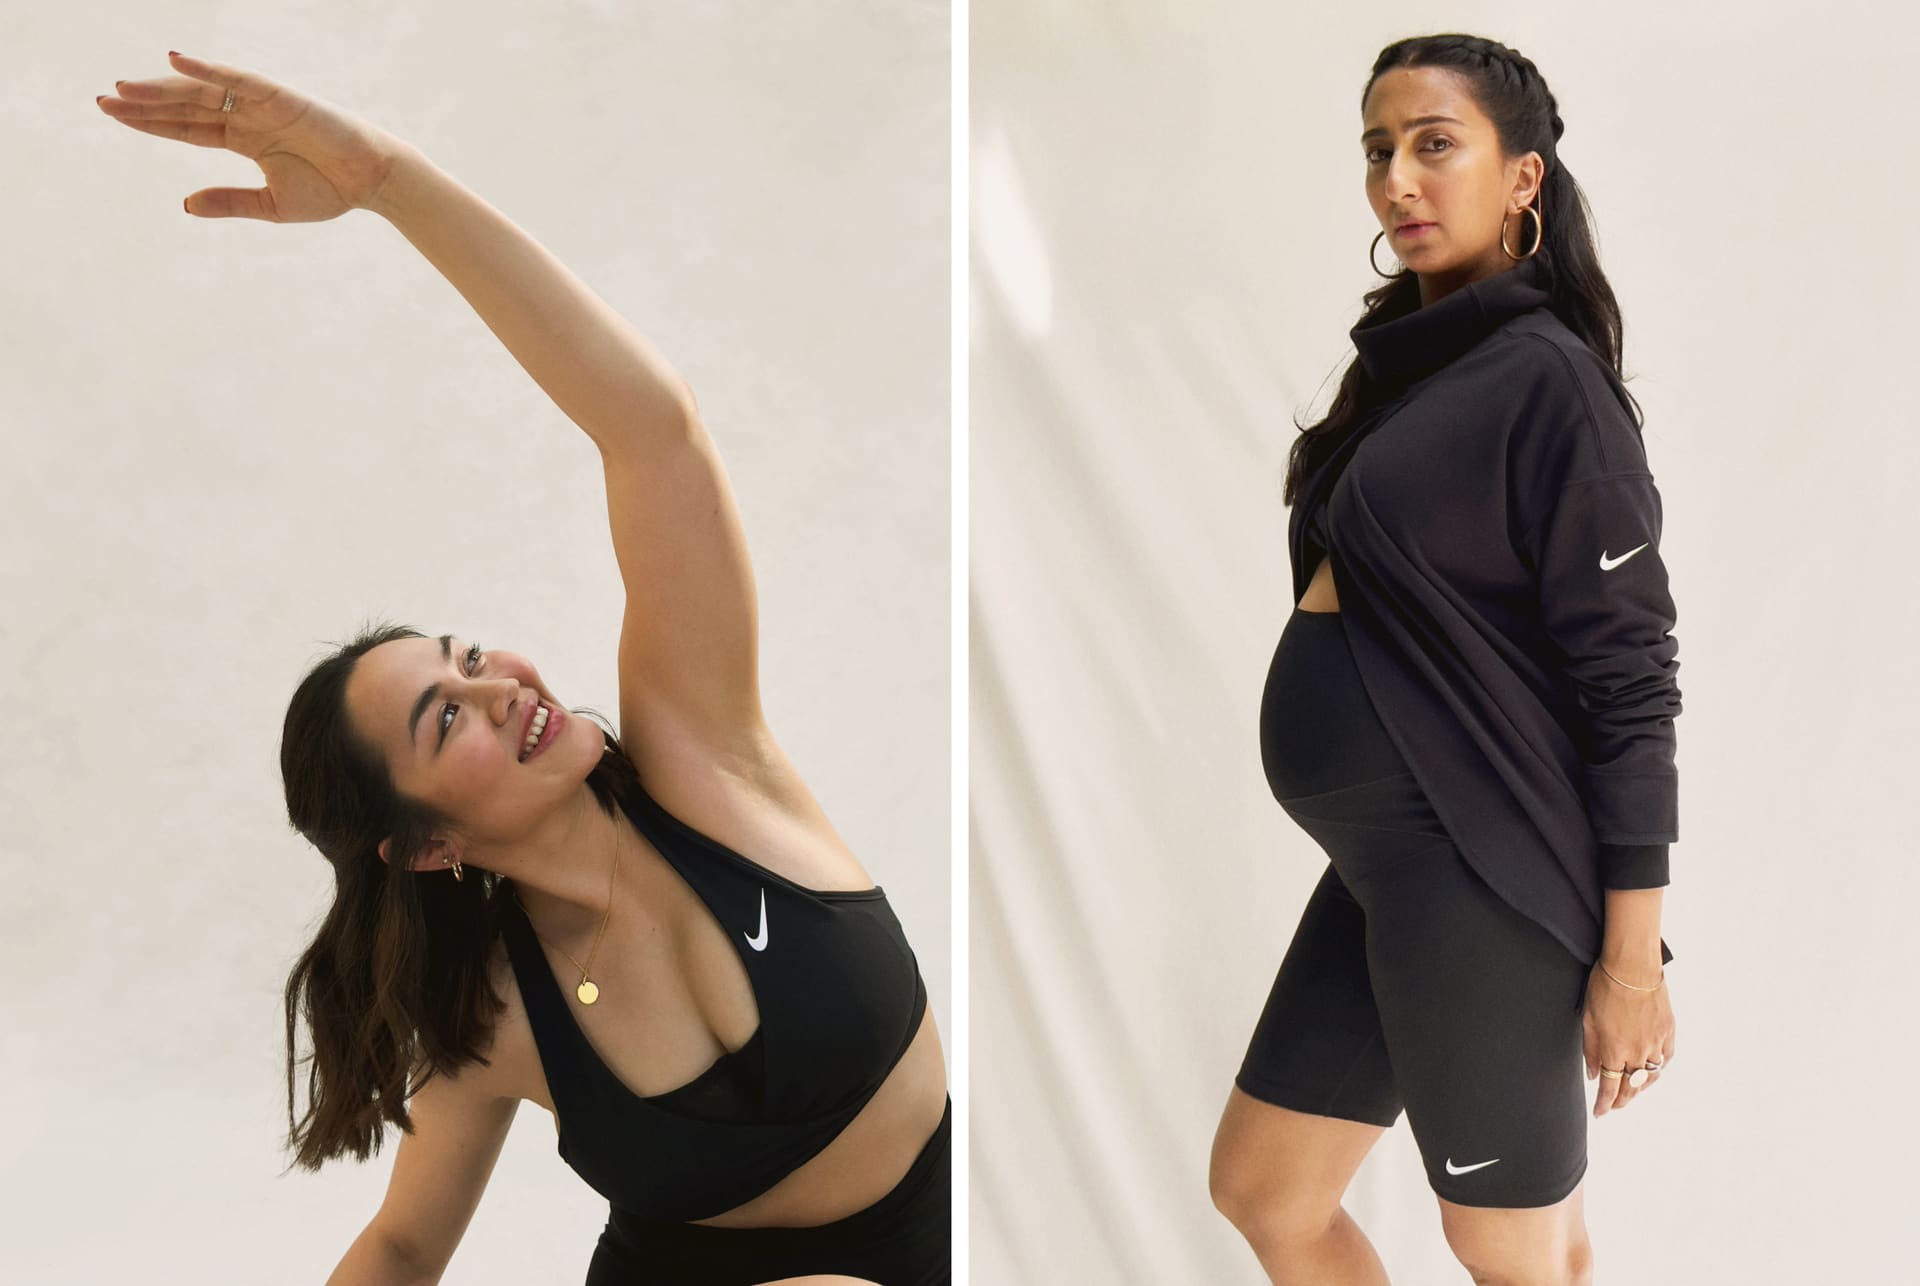 Nike launch new maternity collection of exercise clothes for pregnancy